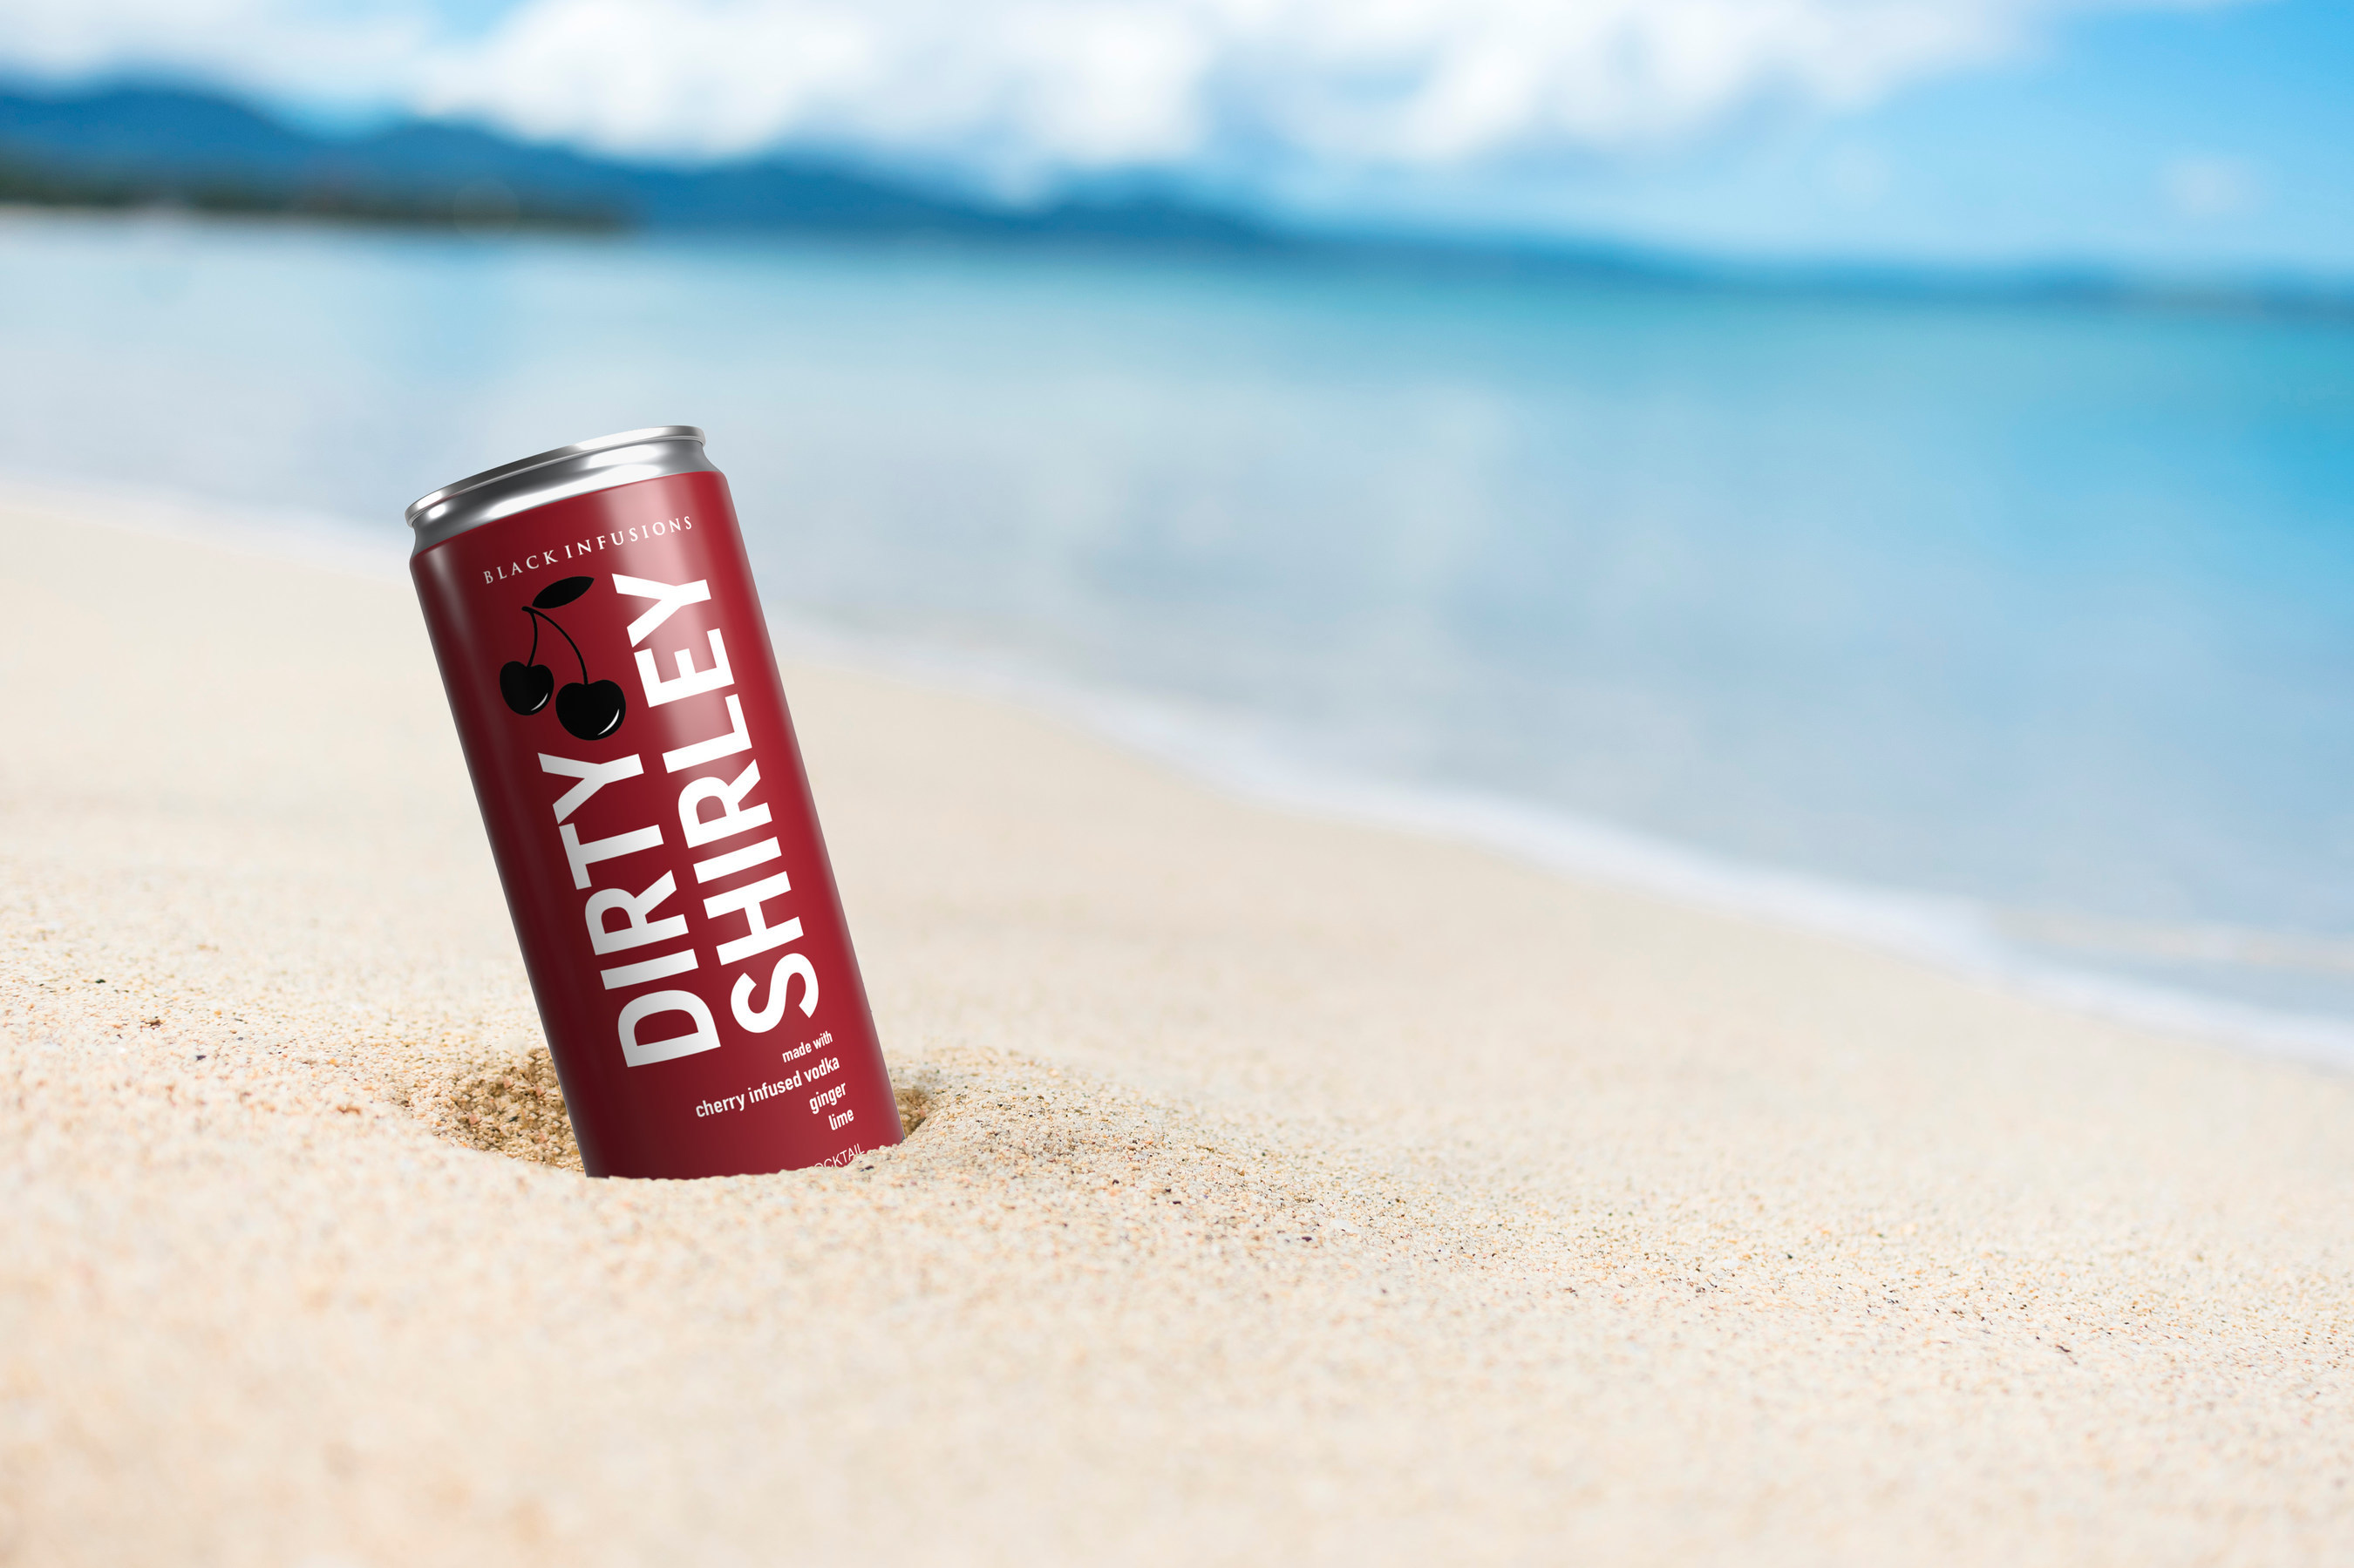 A Dirty Shirley can in the sand